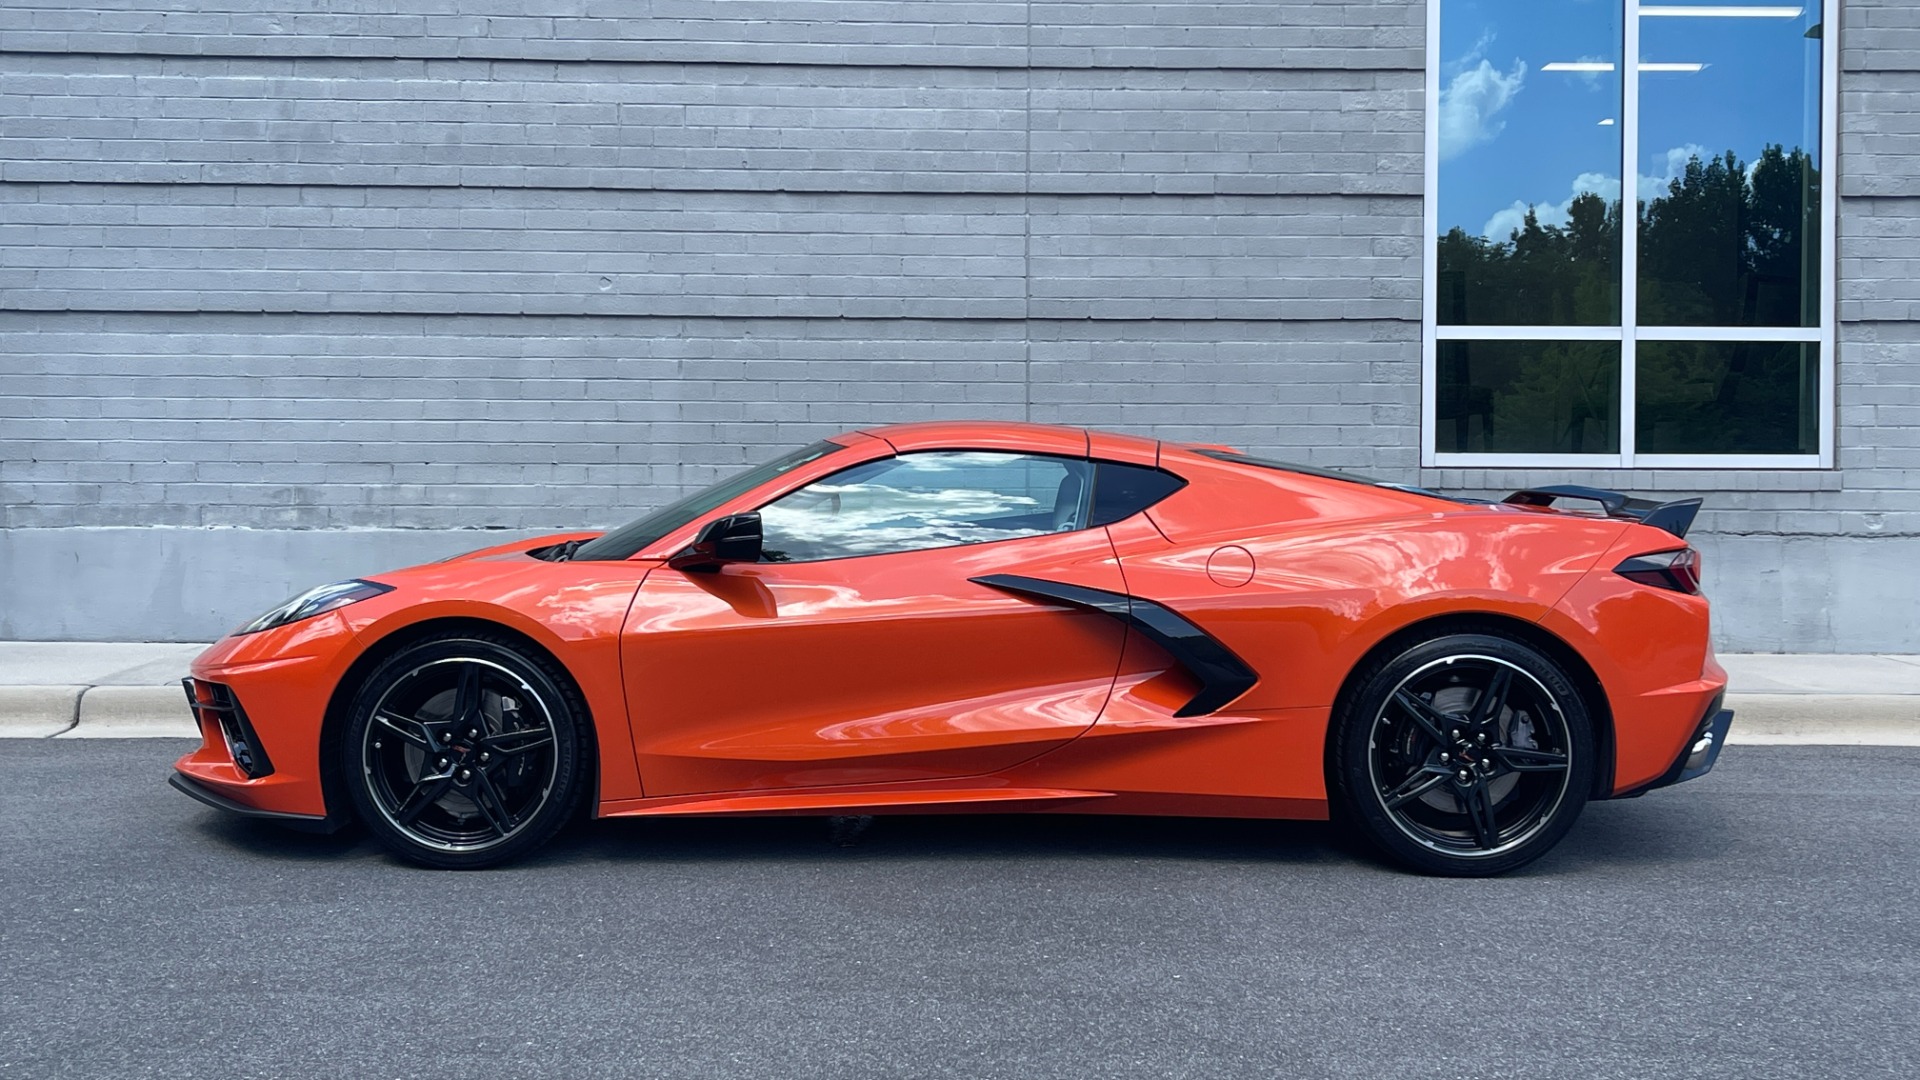 Used 2020 Chevrolet Corvette 3LT / Z51 / PERFORMANCE EXHAUST / FRONT LIFT / Z51 BRAKES / CARBON FIBER AC for sale $92,595 at Formula Imports in Charlotte NC 28227 5